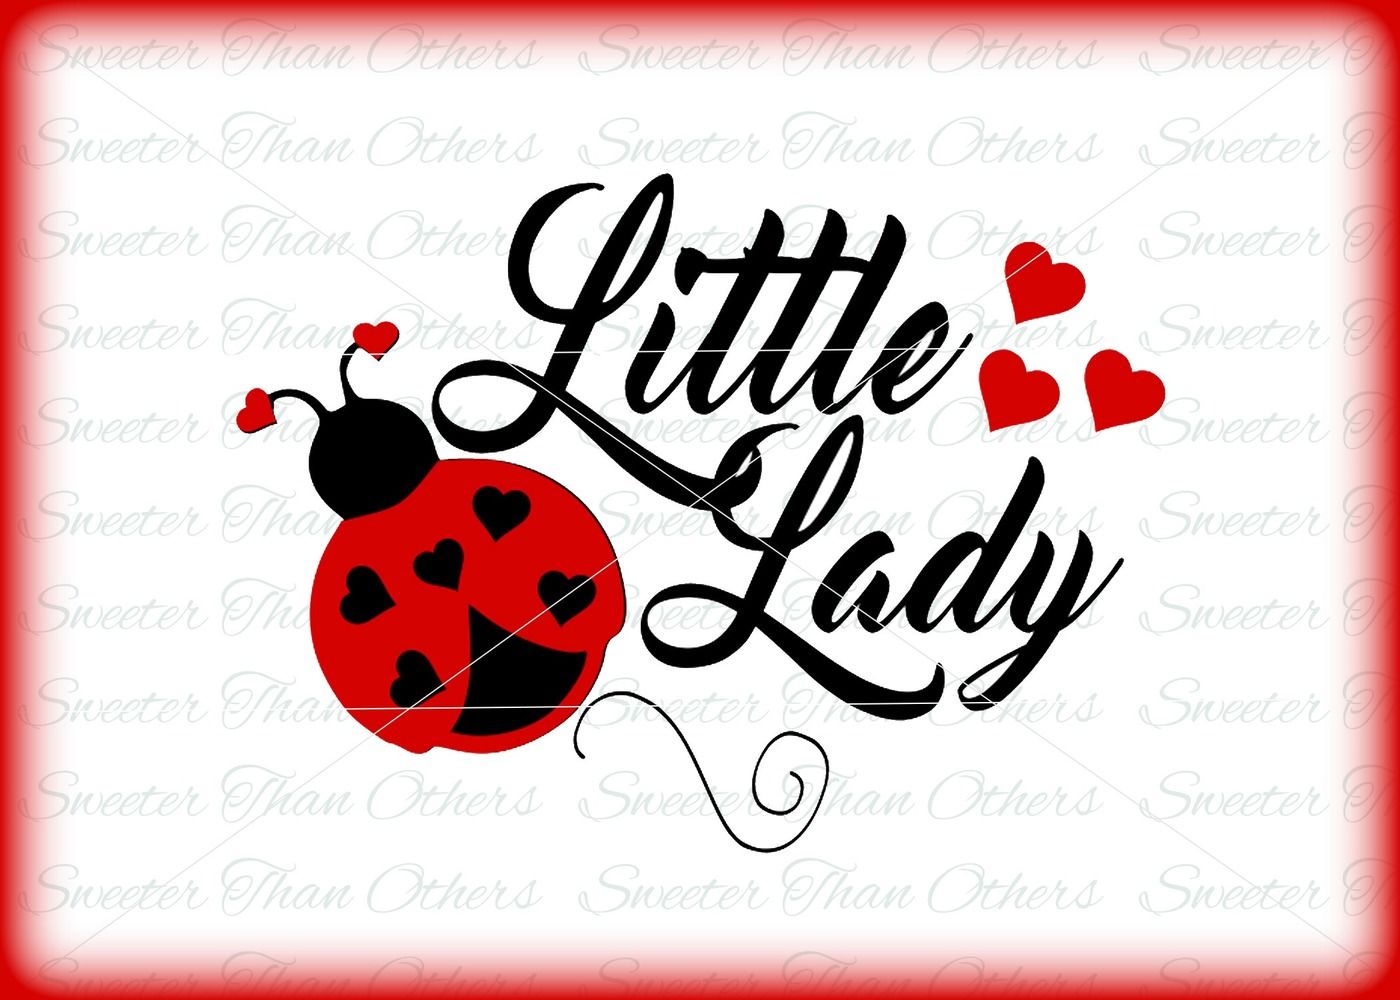 Little Lady Ladybug Girl Tshirt Shirt Svg Vinyl Design Svg Dxf Silhouette Cricut Cameo Instant Download Scal Mtc Studio Cut File Htv By Sweeter Than Others Thehungryjpeg Com